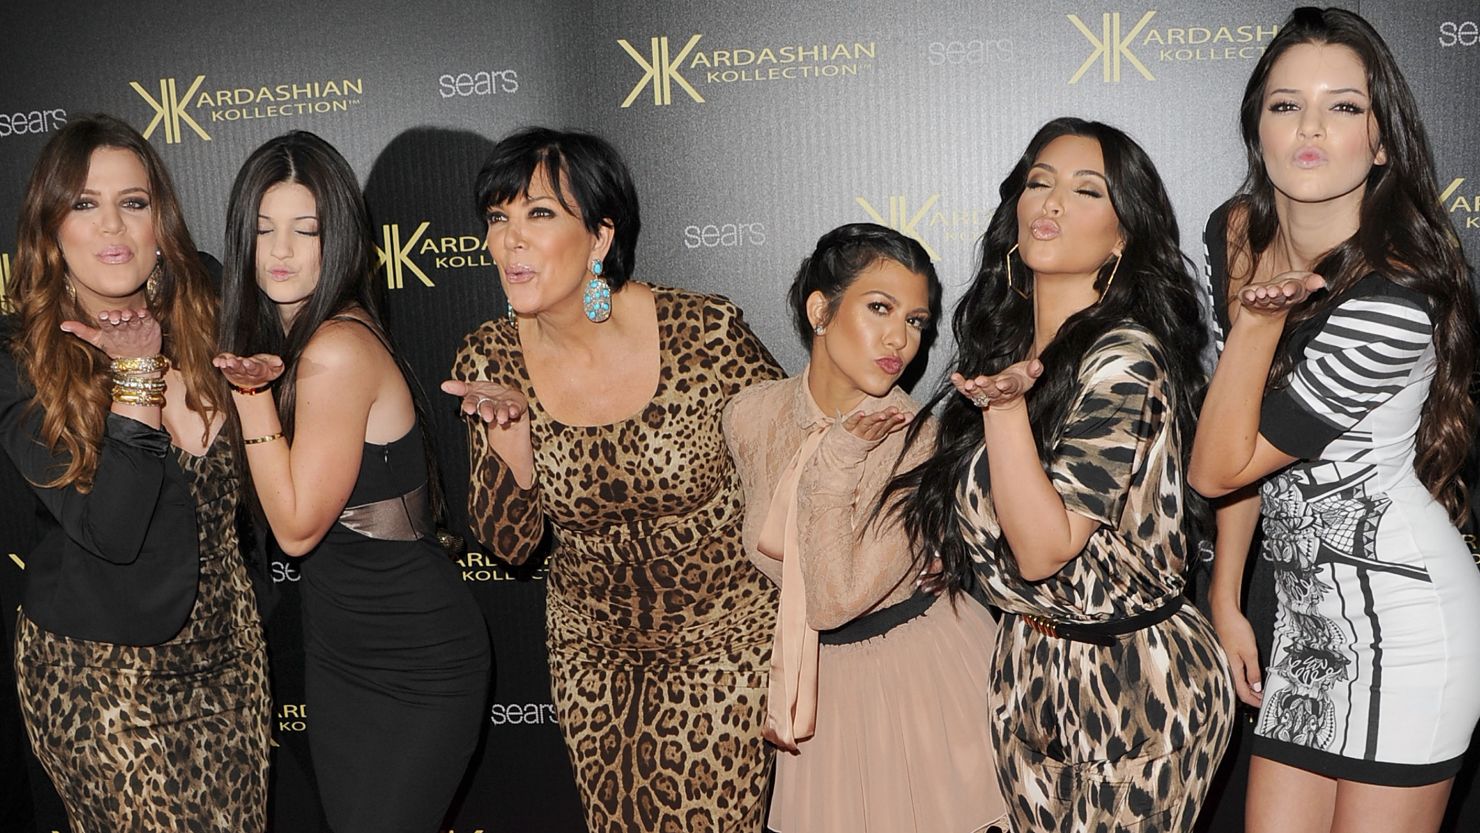 (From left) Khloé Kardasian, Kylie Jenner, Kris Jenner, Kourtney Kardashian, Kim Kardashian and Kendall Jenner attend the Kardashian Kollection launch party at The Colony  in Hollywood, California, August 17, 2011.